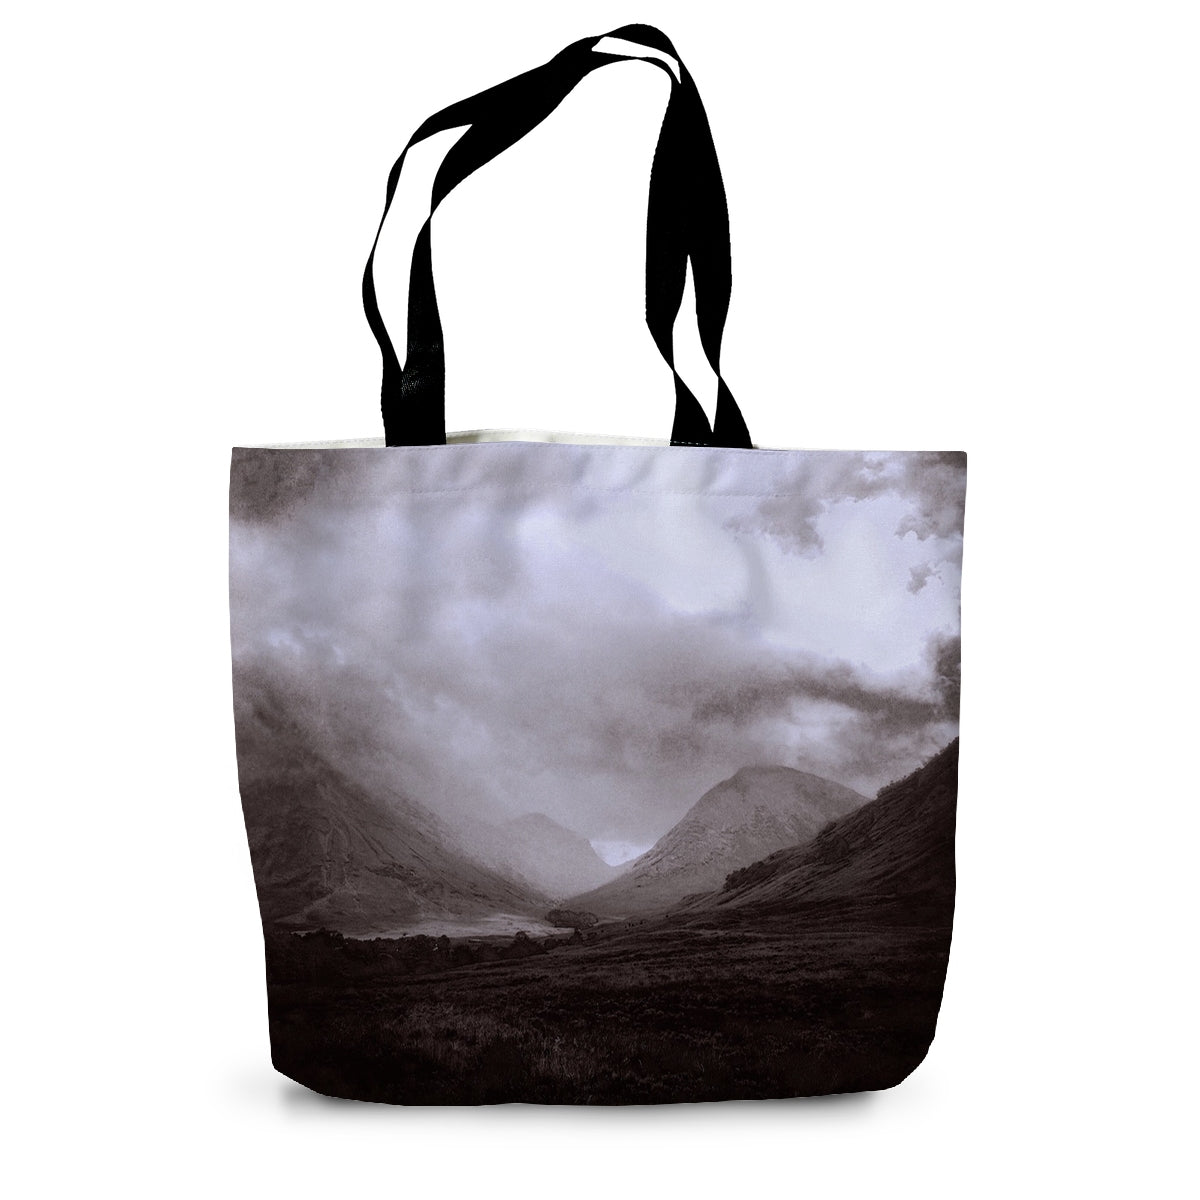 Glencoe Mist Art Gifts Canvas Tote Bag-Bags-Glencoe Art Gallery-14"x18.5"-Paintings, Prints, Homeware, Art Gifts From Scotland By Scottish Artist Kevin Hunter